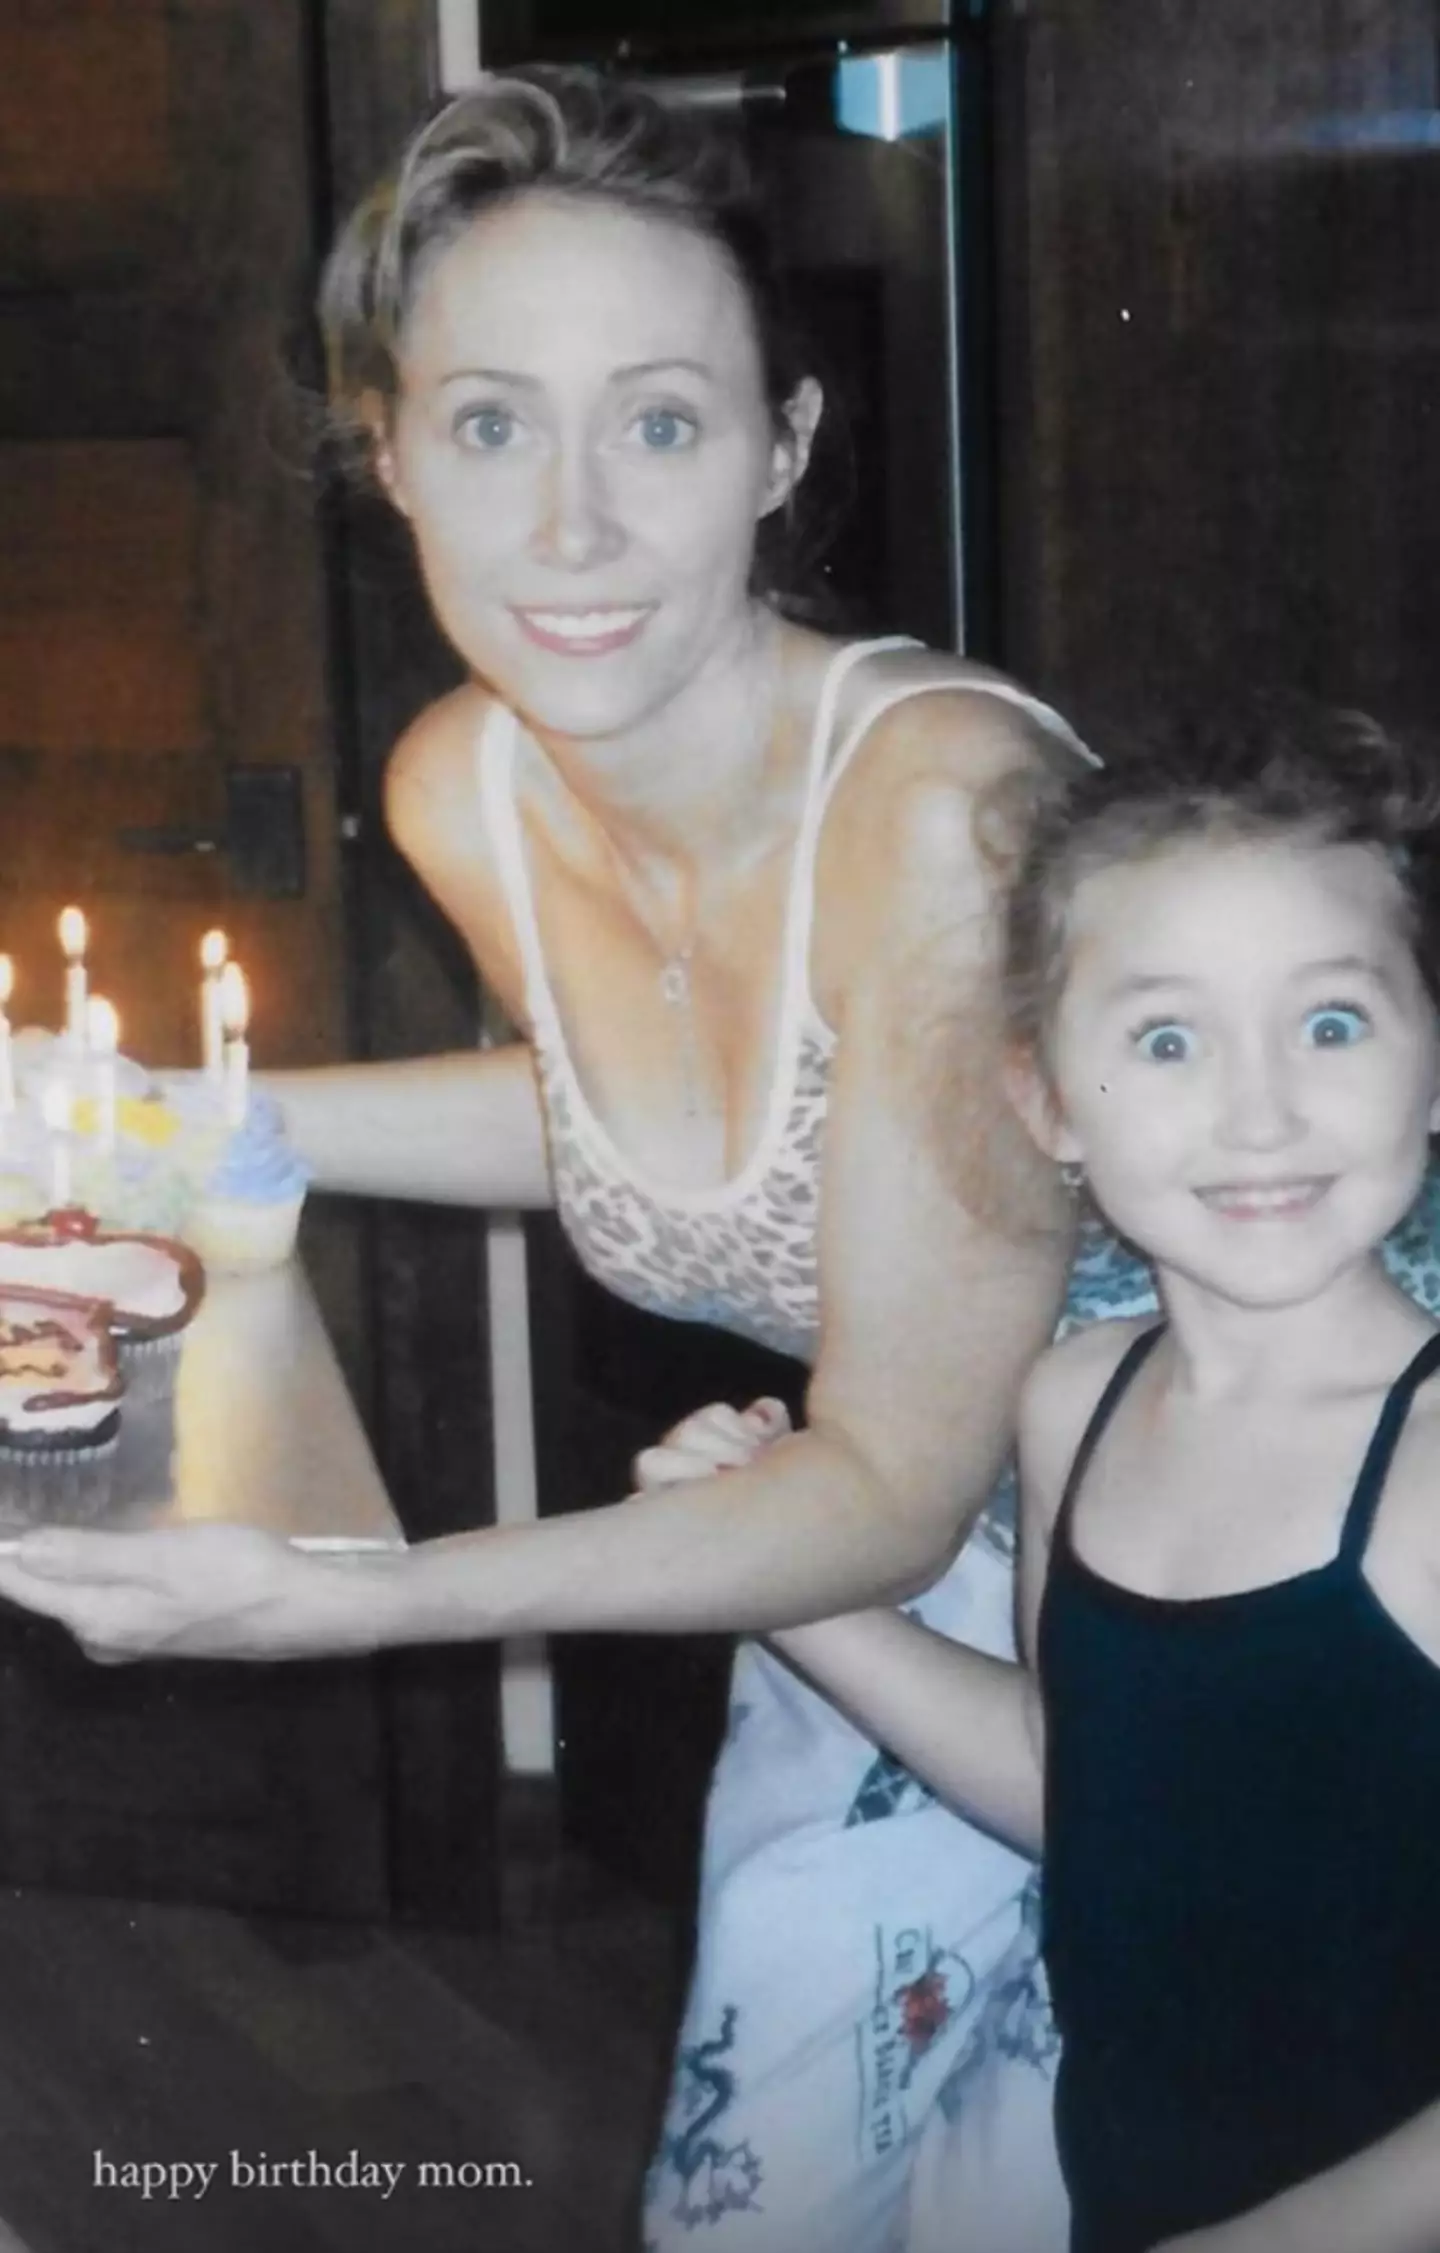 Noah Cyrus appeared to quash the drama in a Happy Birthday post for her mum. (Instagram/@noahcyrus)